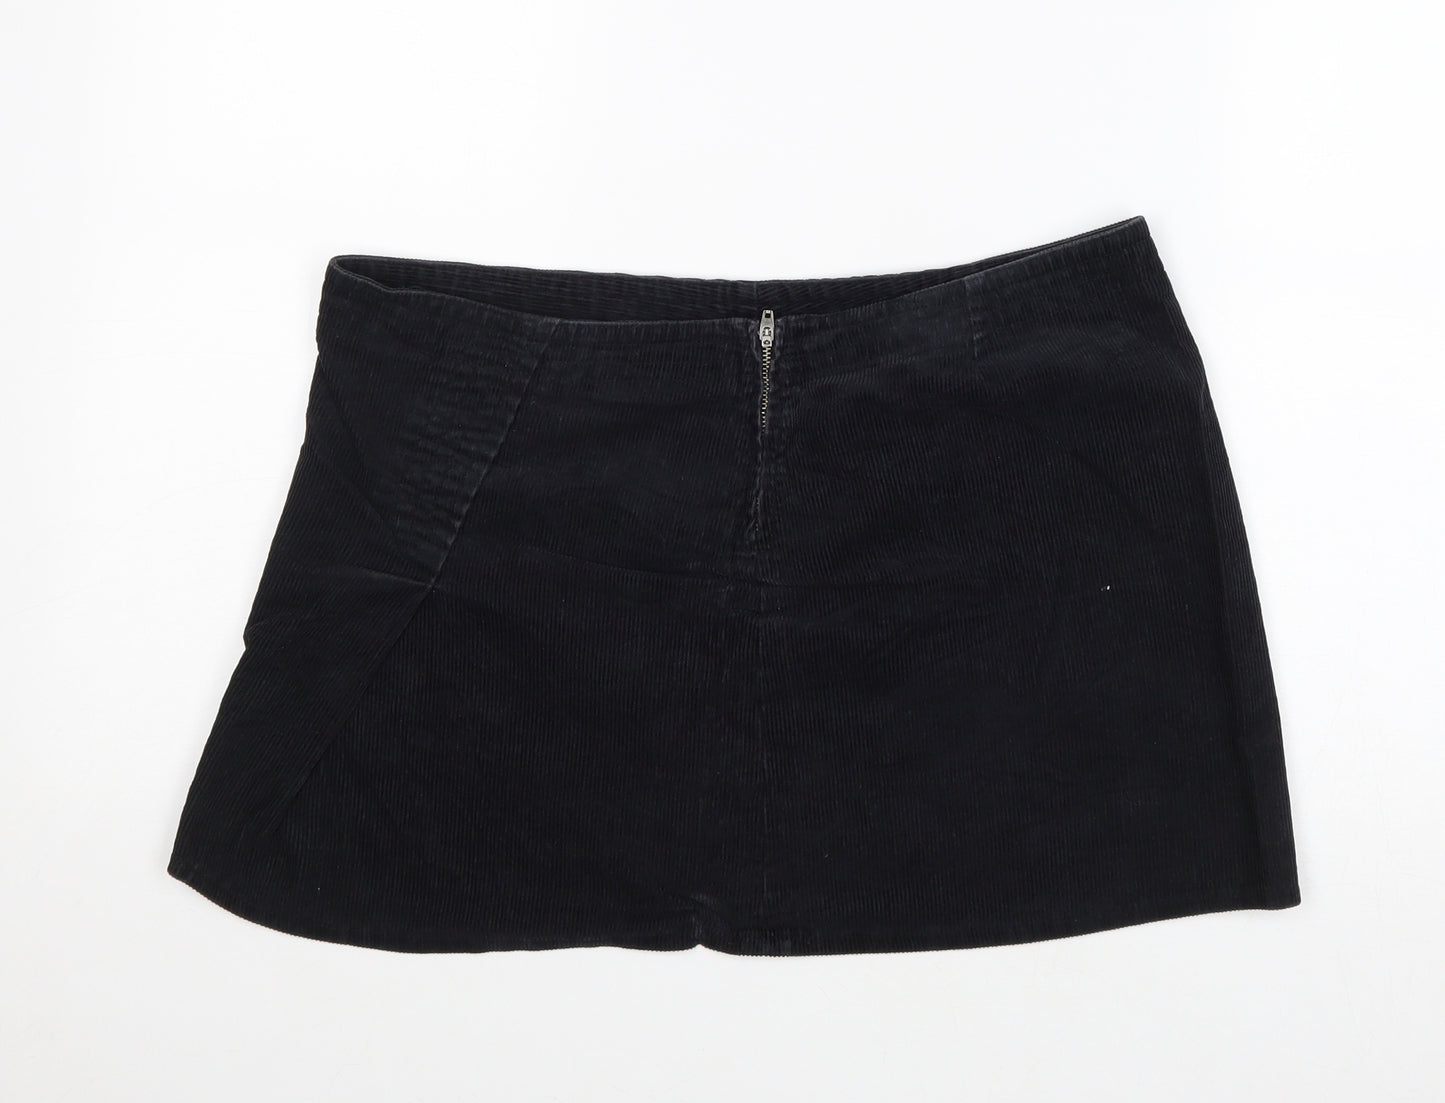 United Colors of Benetton Womens Black Cotton Mini Skirt Size 34 in Zip